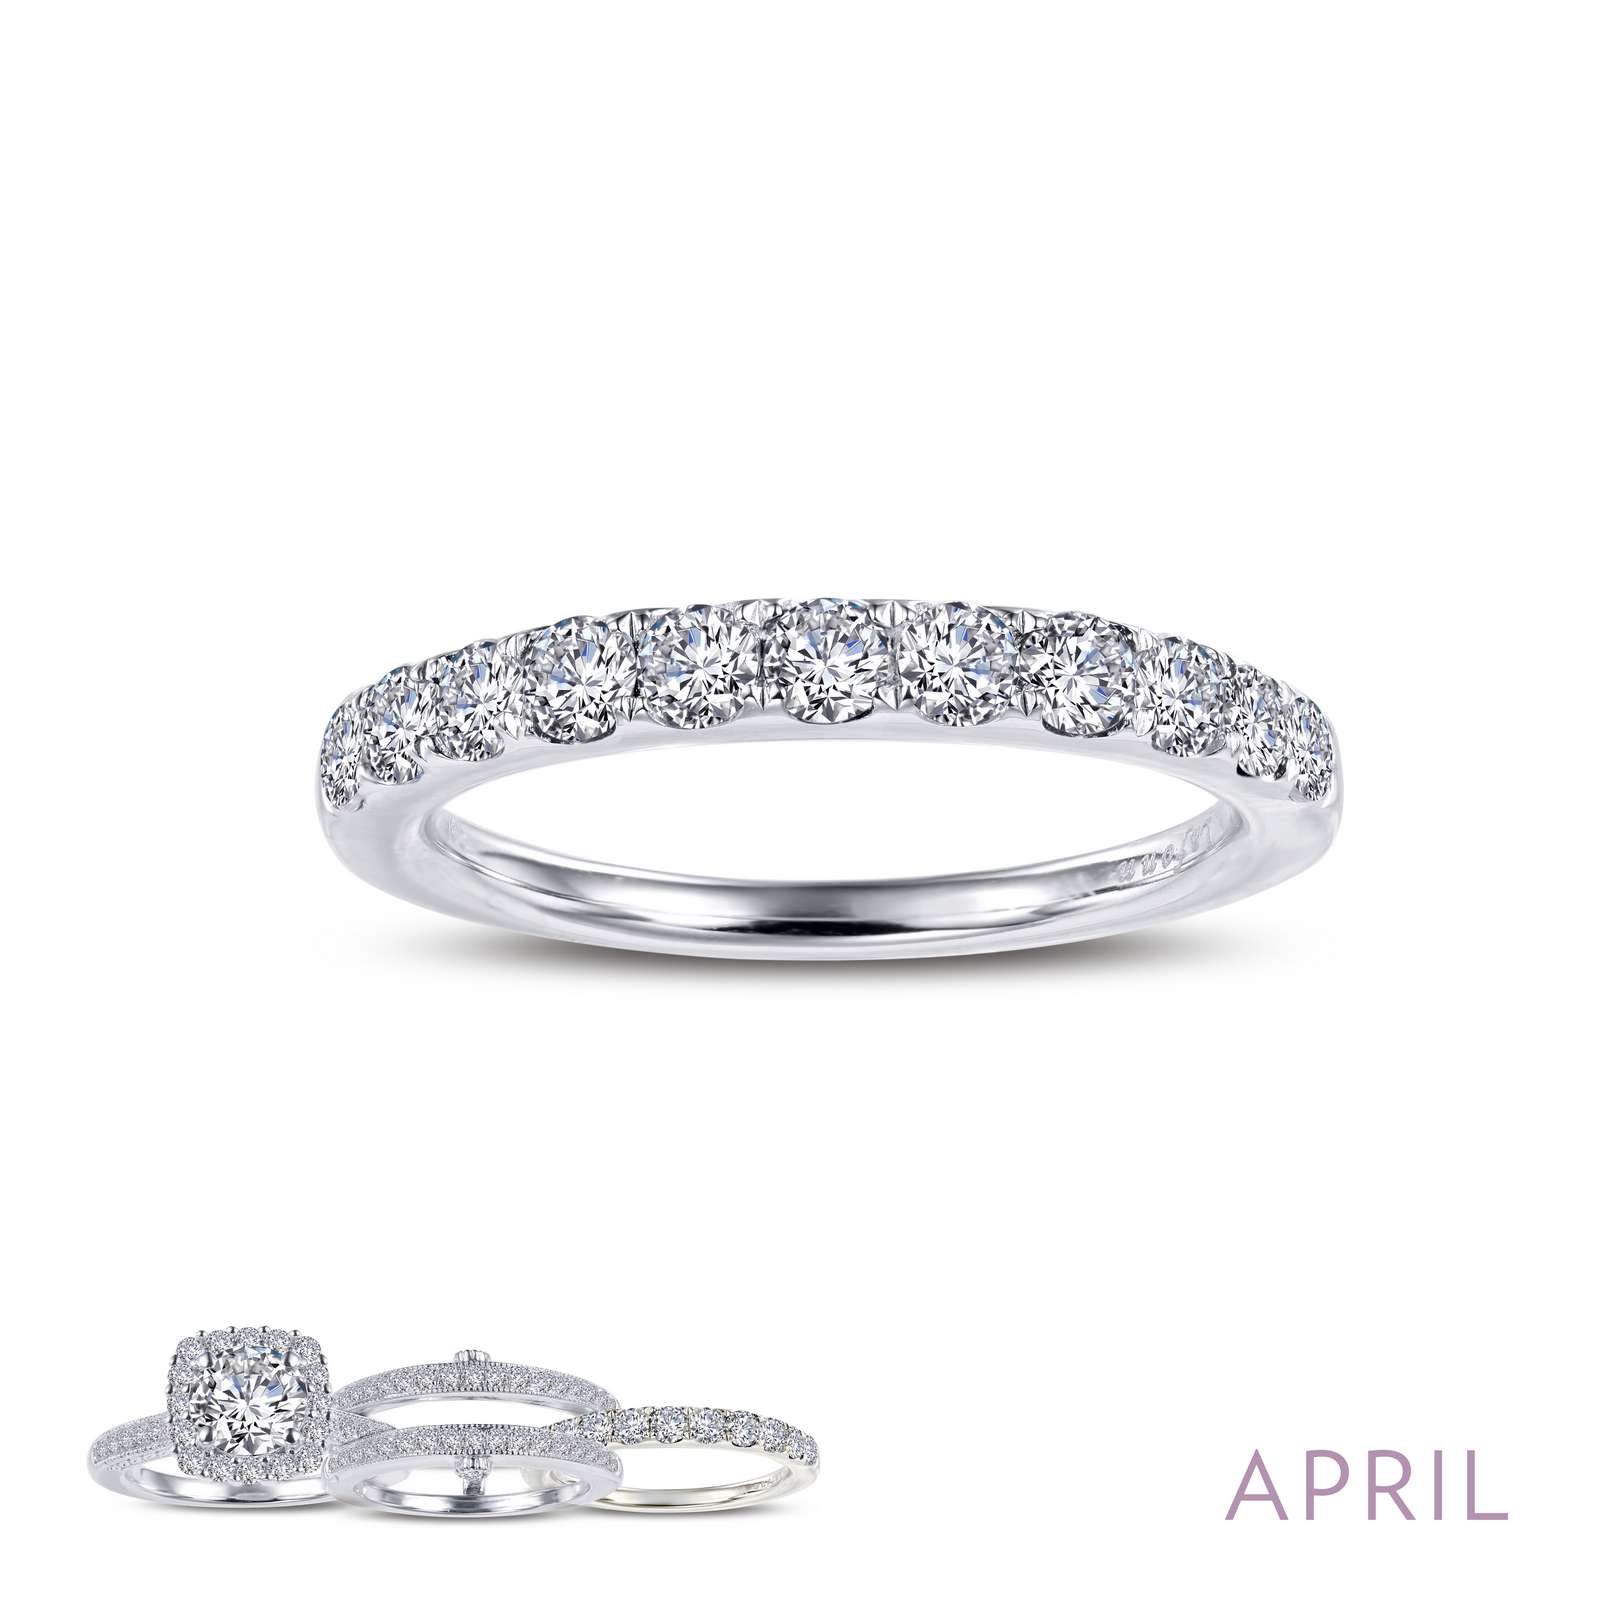 April Birthstone Ring Griner Jewelry Co. Moultrie, GA